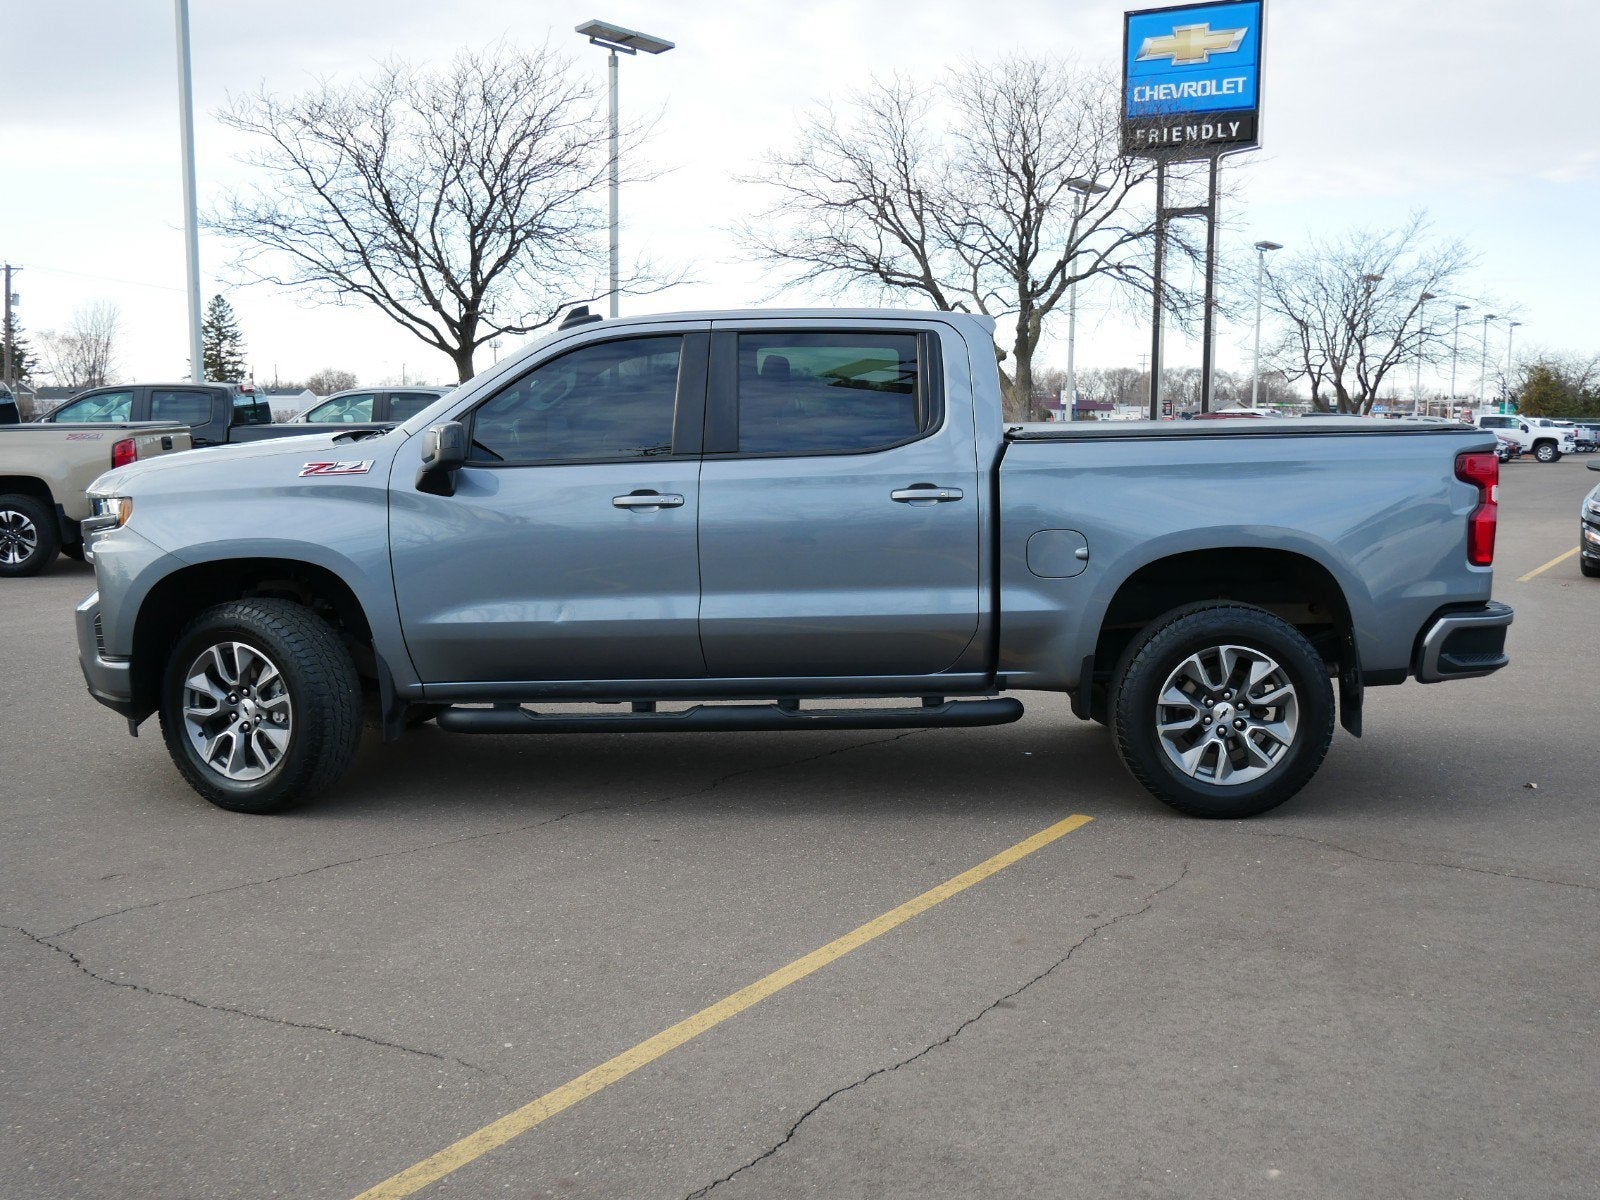 Used 2019 Chevrolet Silverado 1500 RST with VIN 1GCUYEED3KZ408834 for sale in Fridley, Minnesota